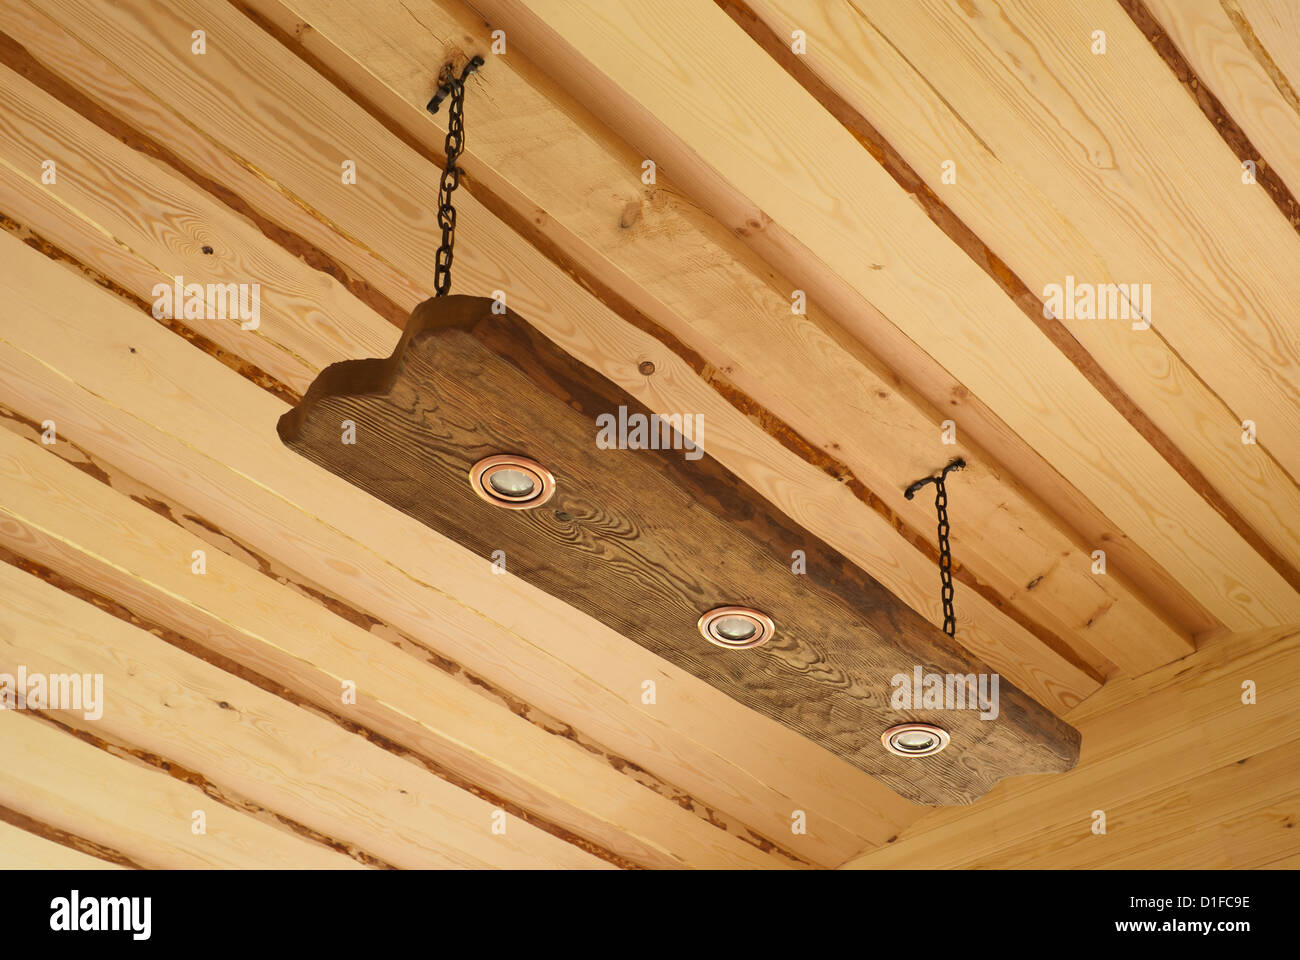 Suspended Ceiling Light In The Form Of An Oak Board With Lights